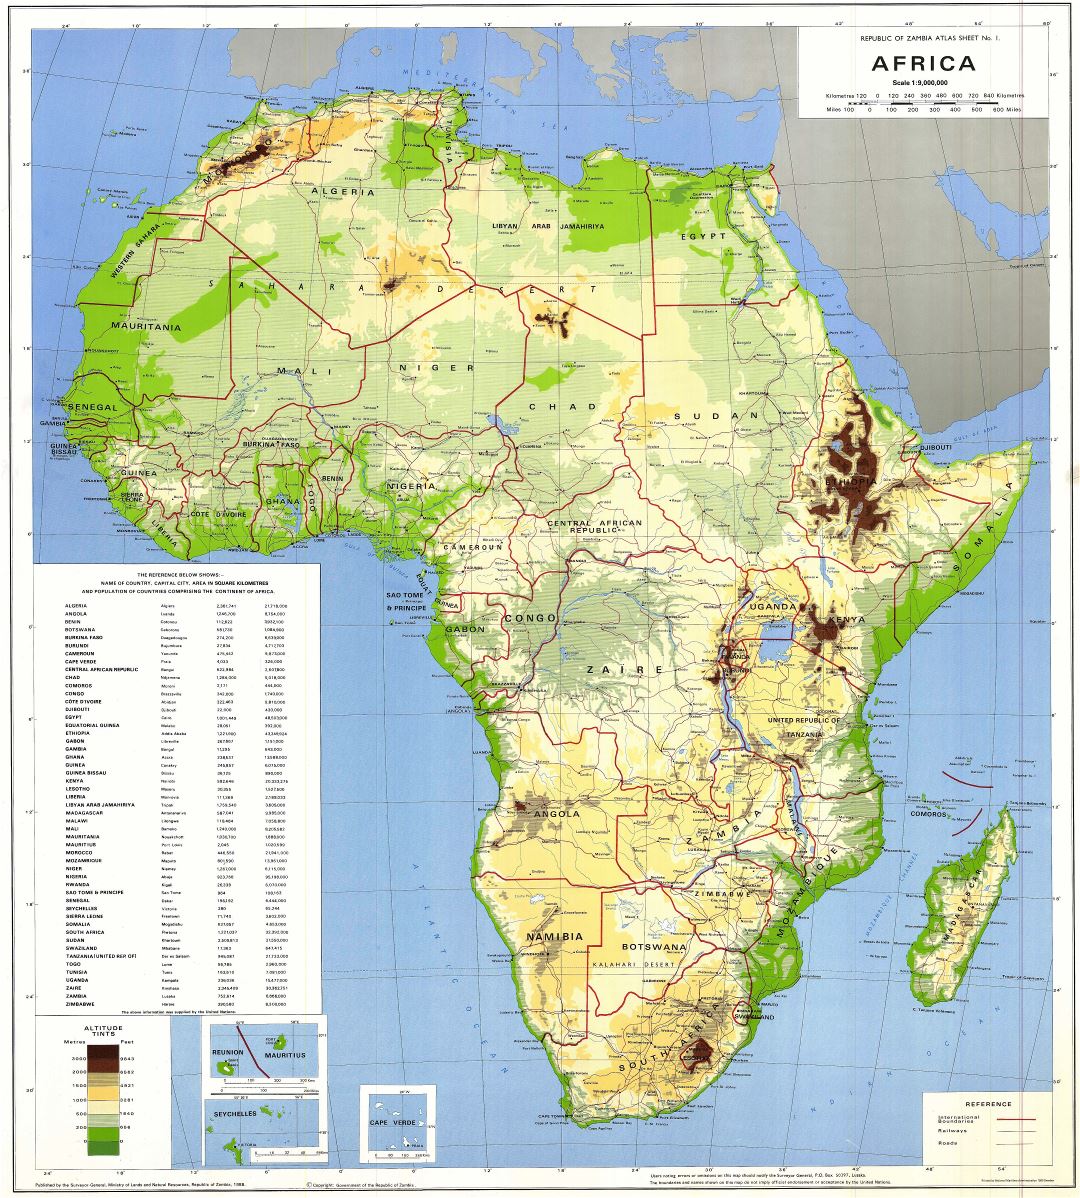 Large scale detailed physical and political map of Africa